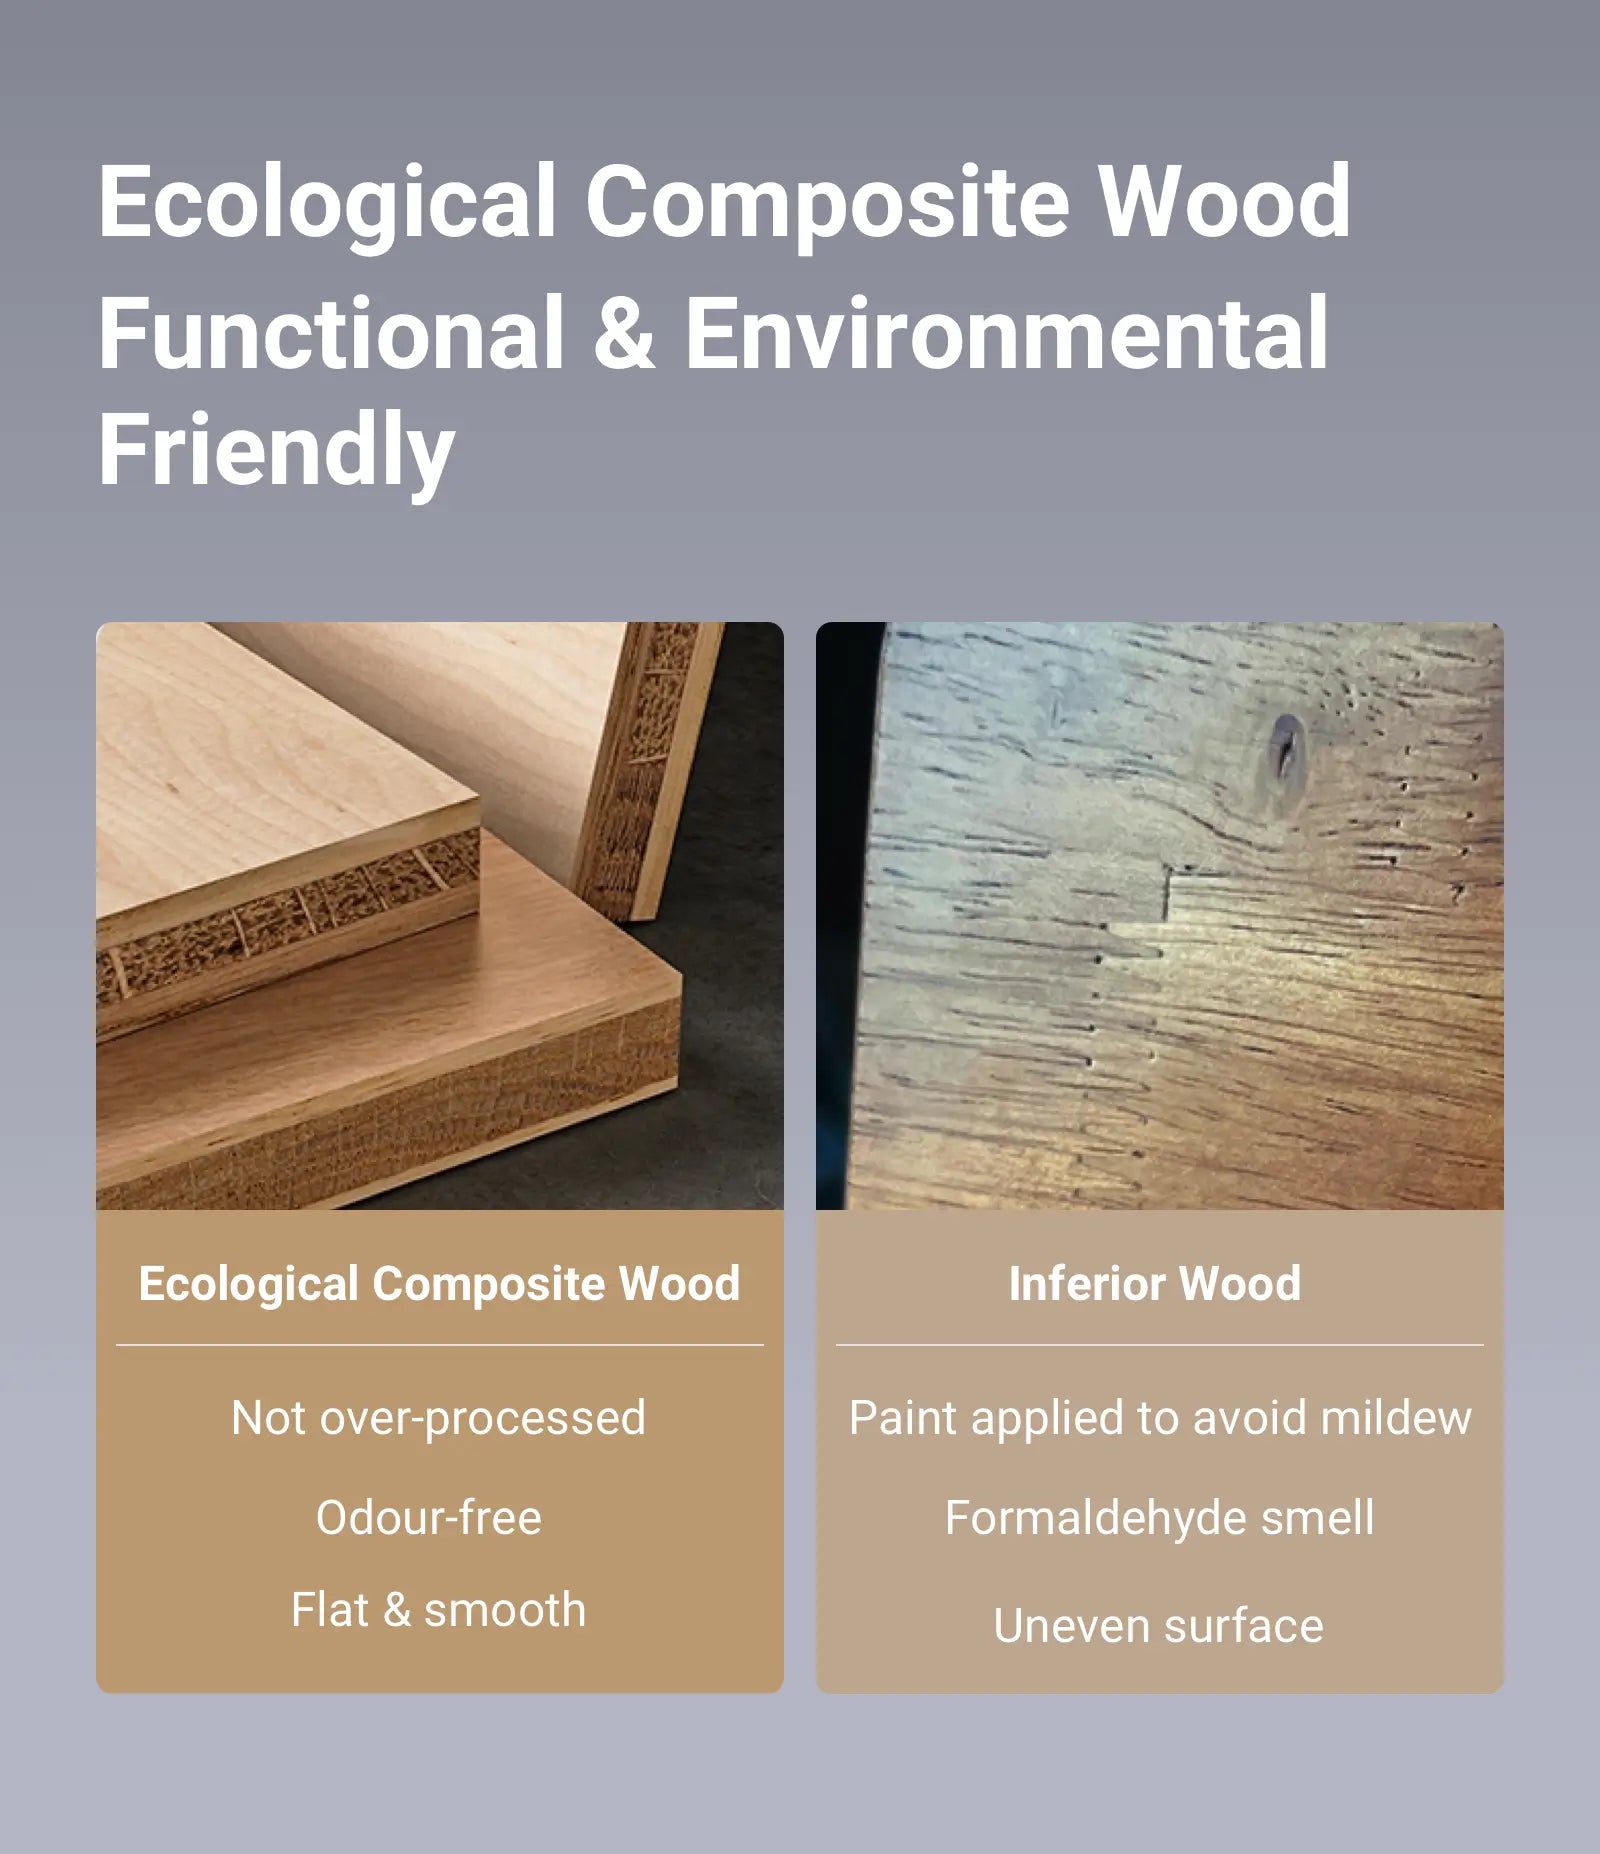 Ecological Composite Wood